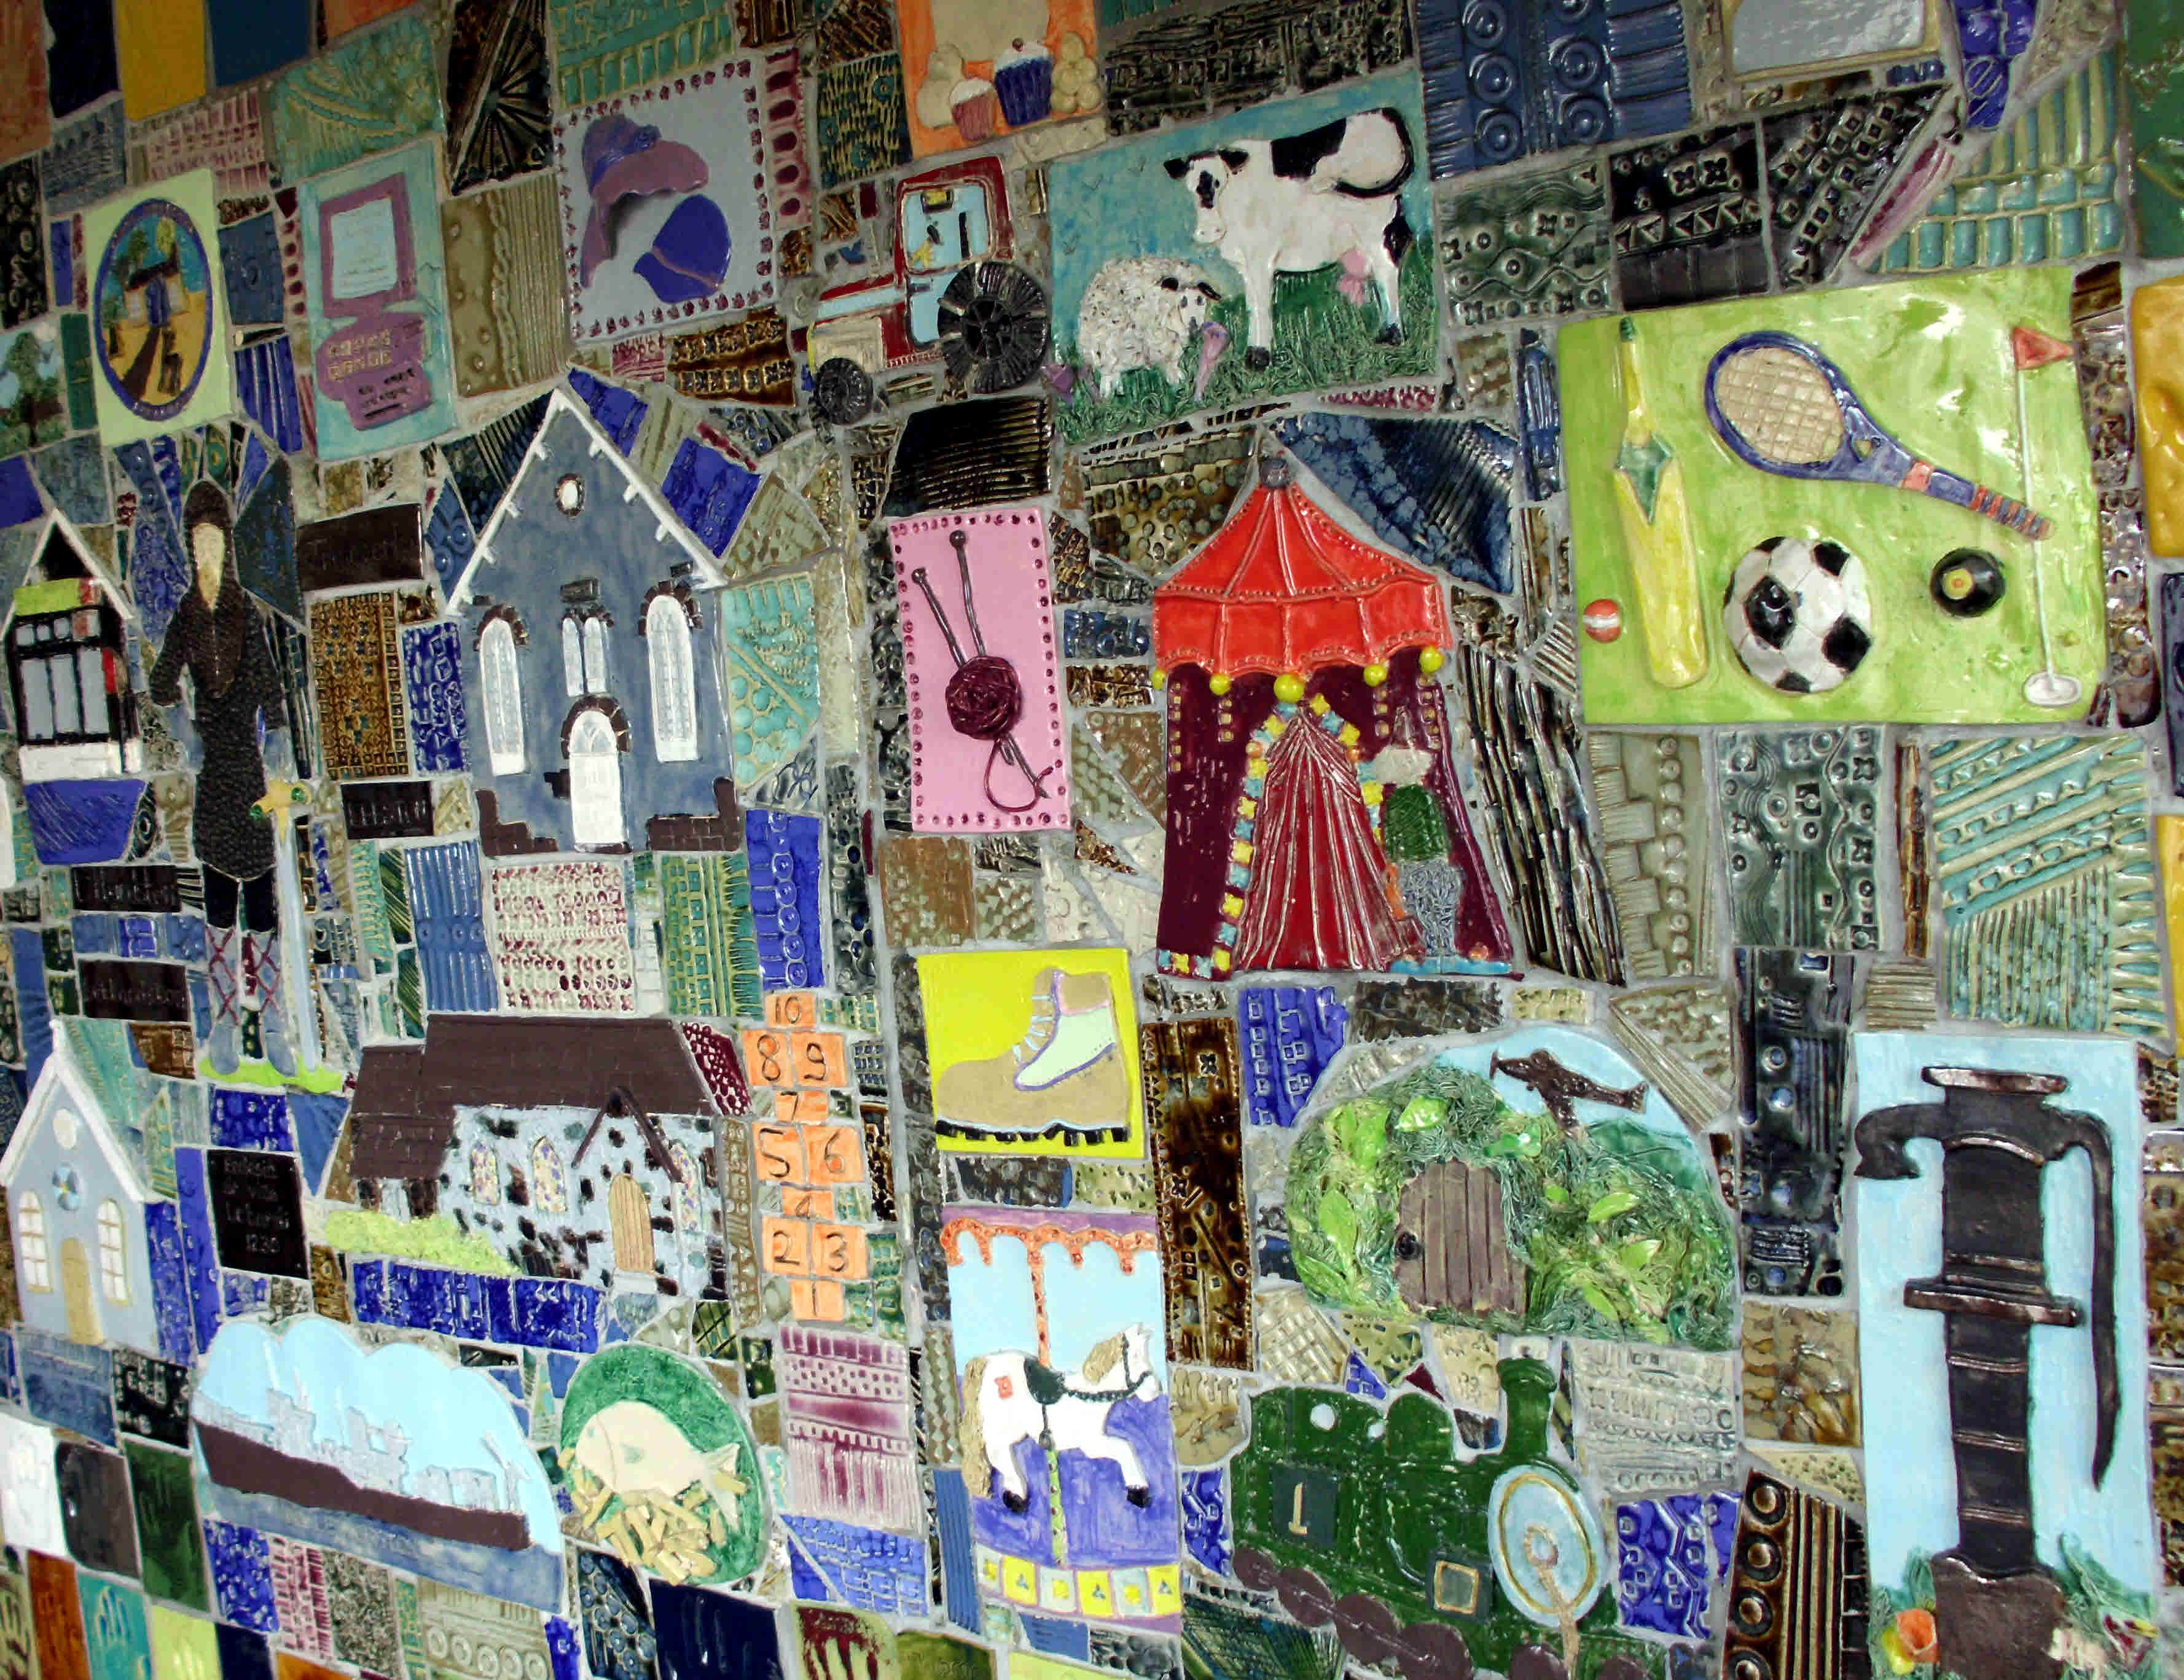 Childrens ceramic tiles in the Hall Entrance